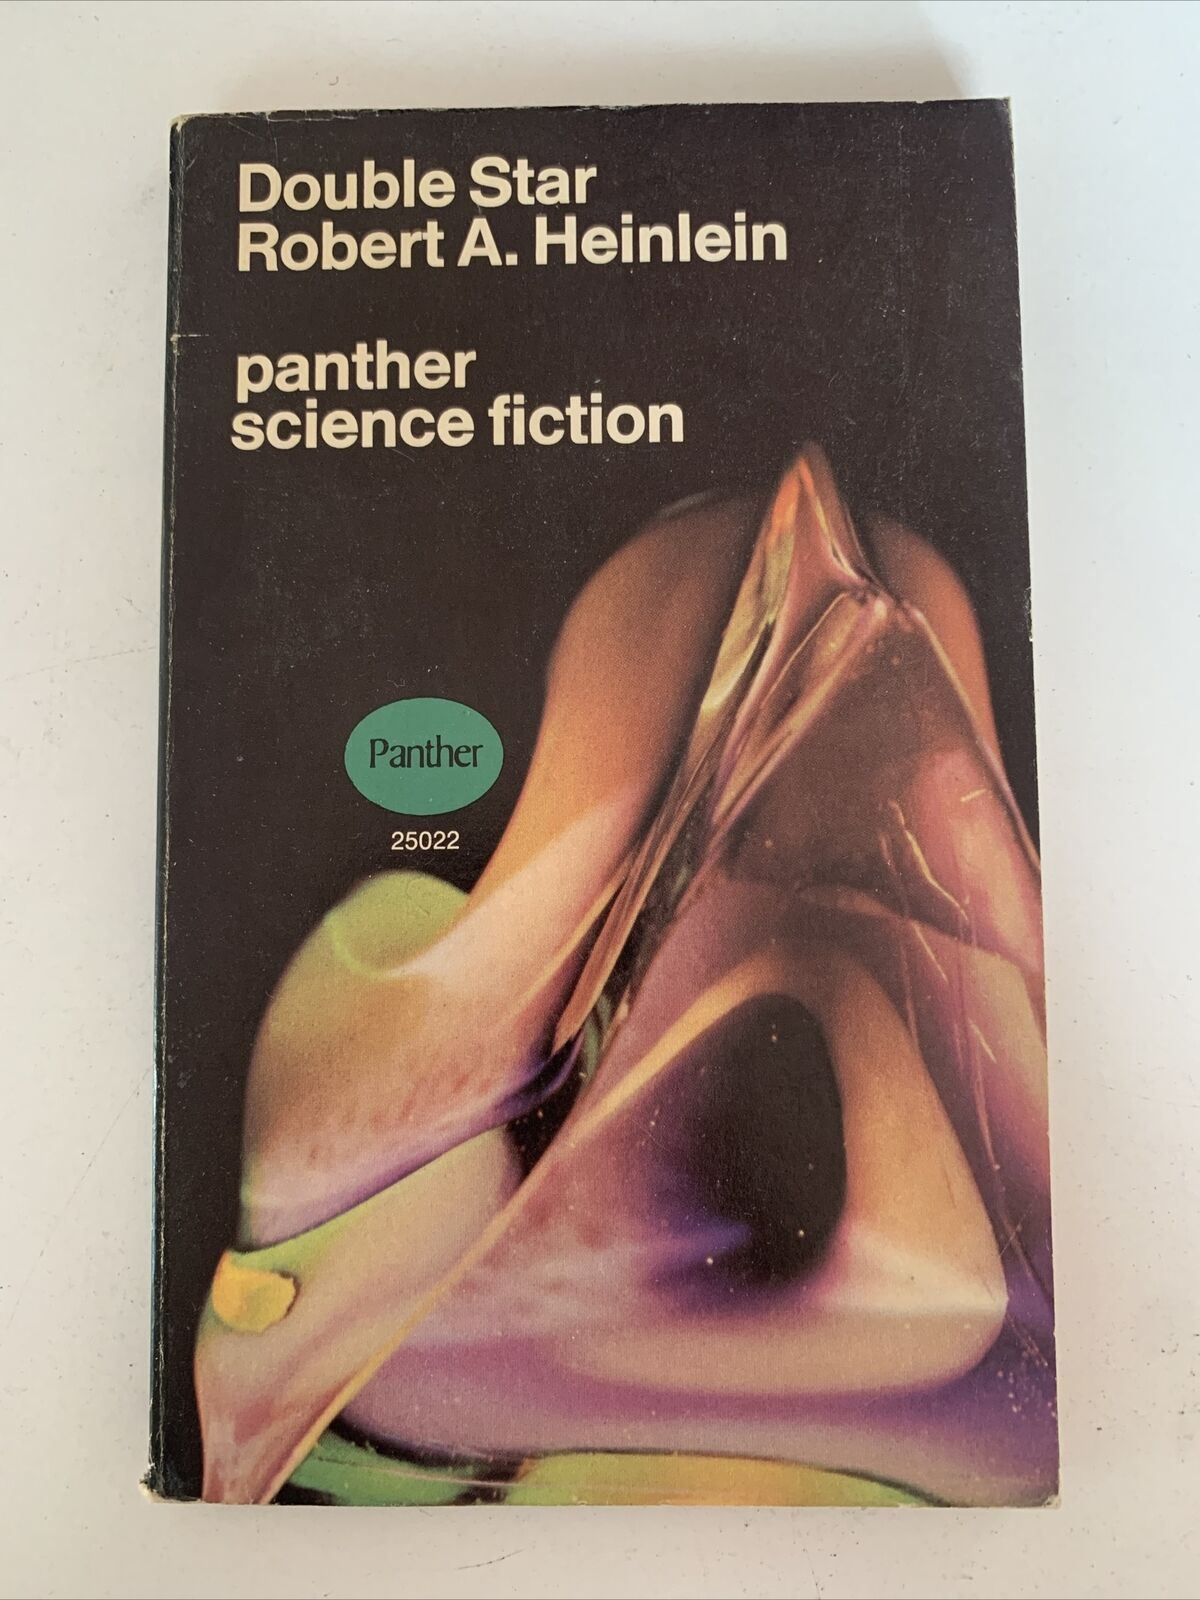 Double Star by Robert A Heinlein - Science Fiction